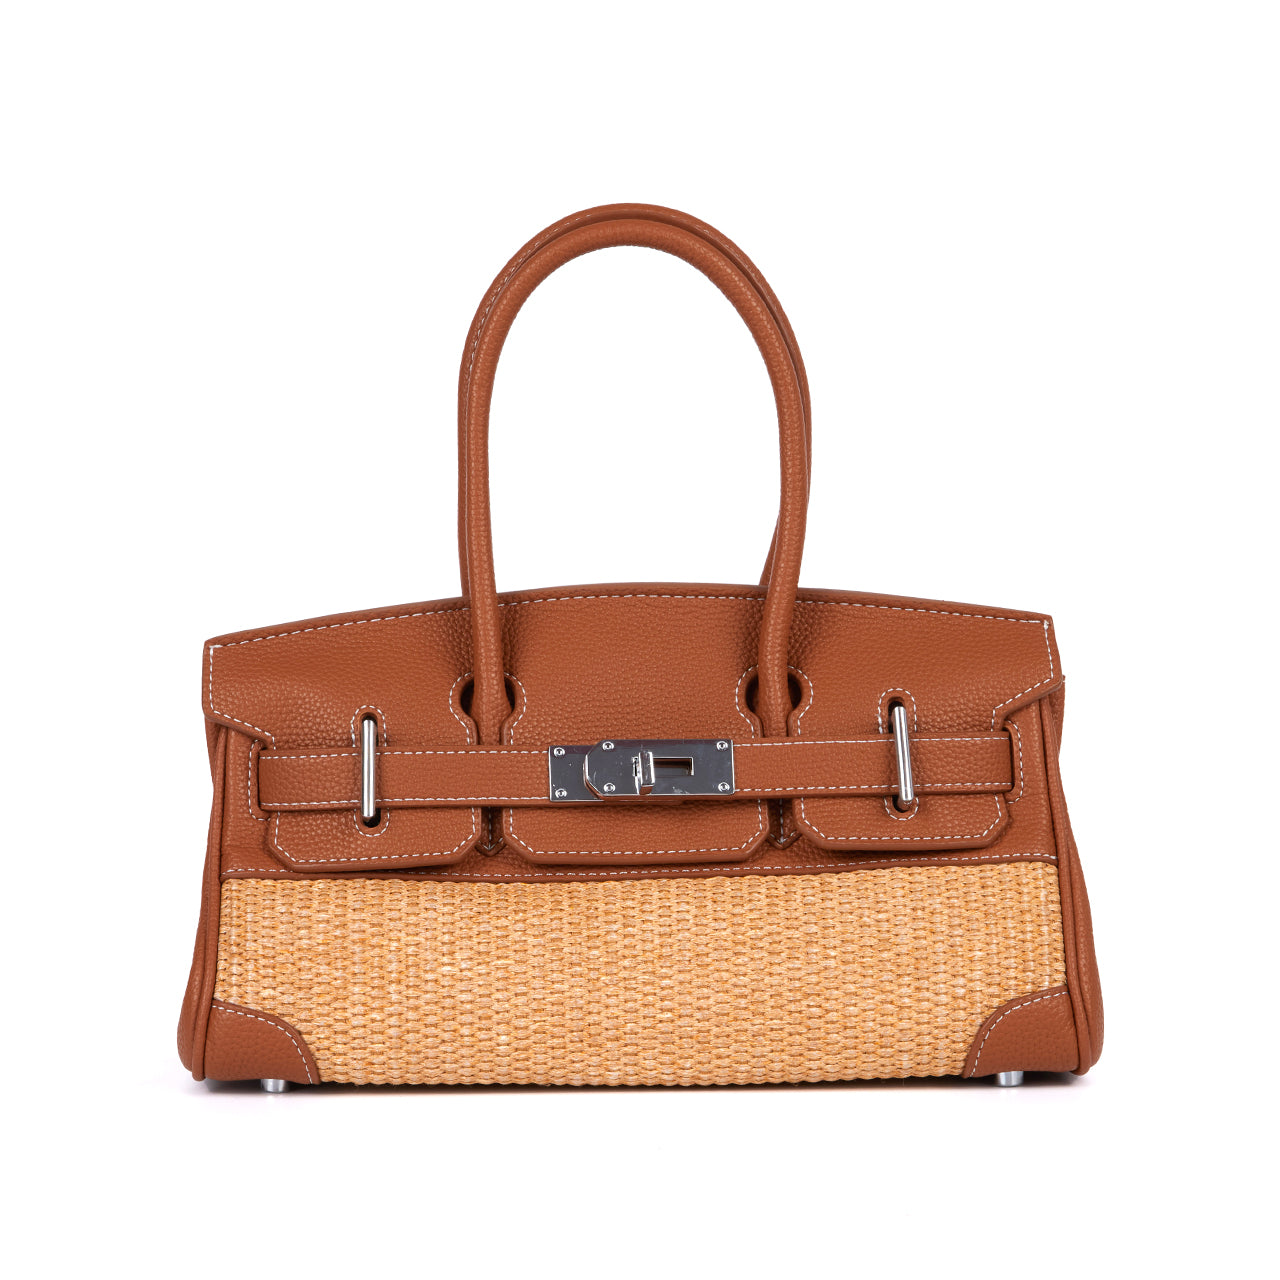 A-1576  Rattan and Leather Tote Bag